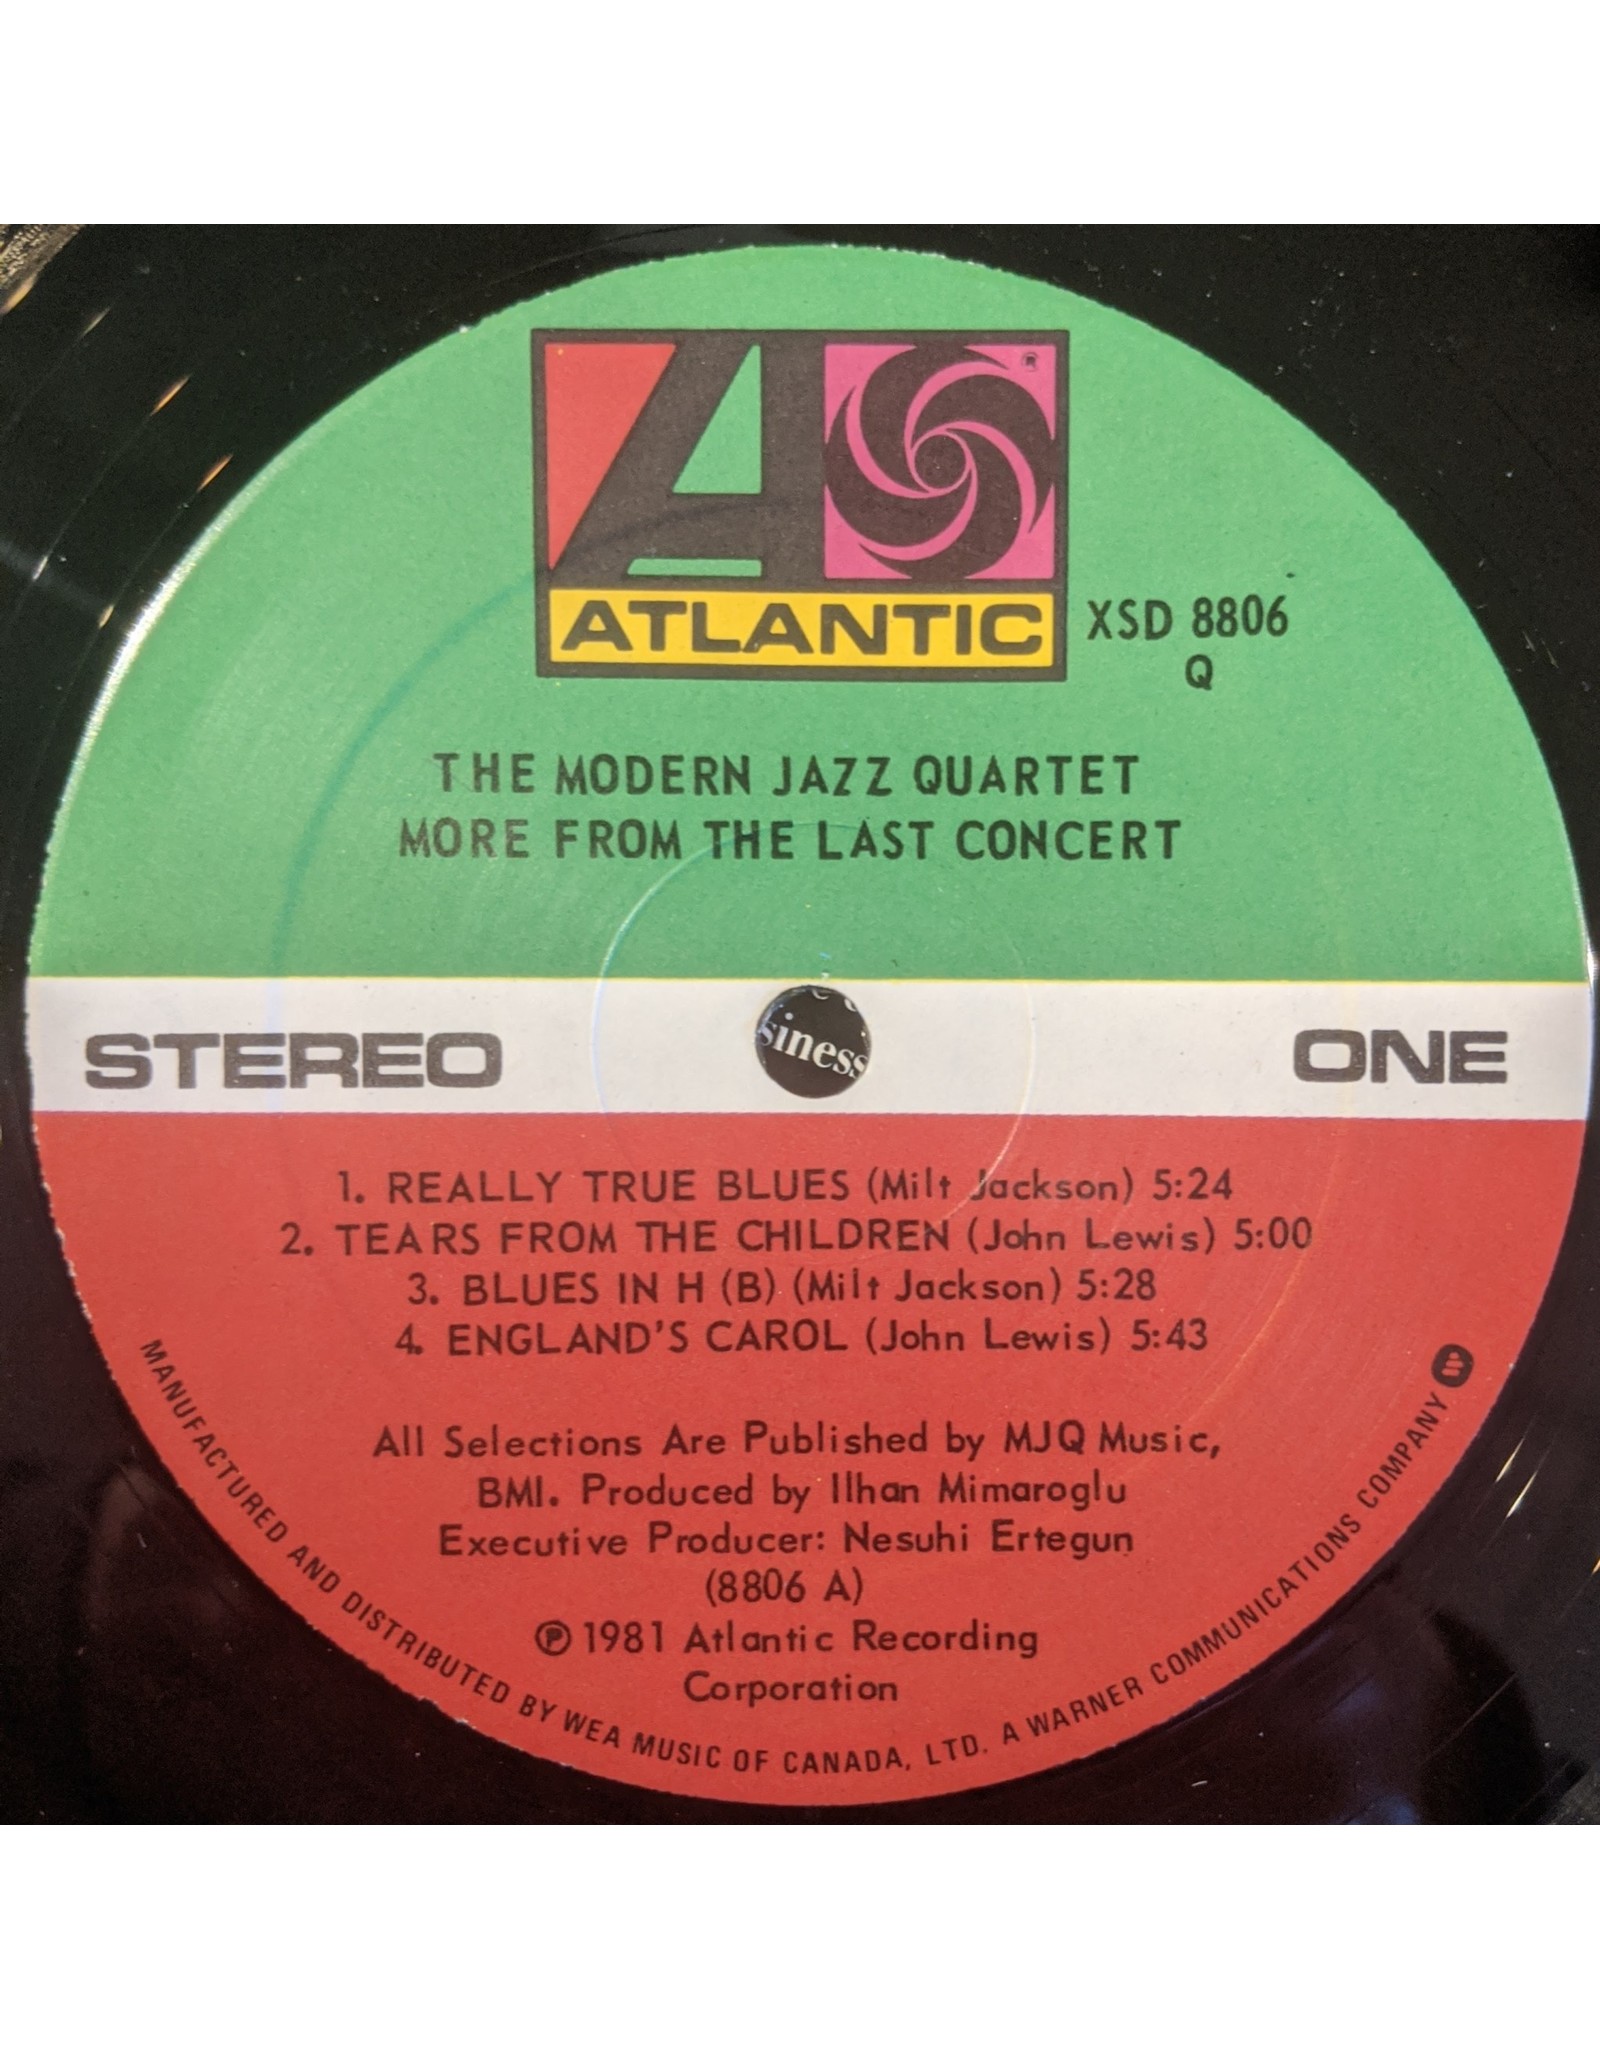 USED: Modern Jazz Quartet: More from the Last Concert LP